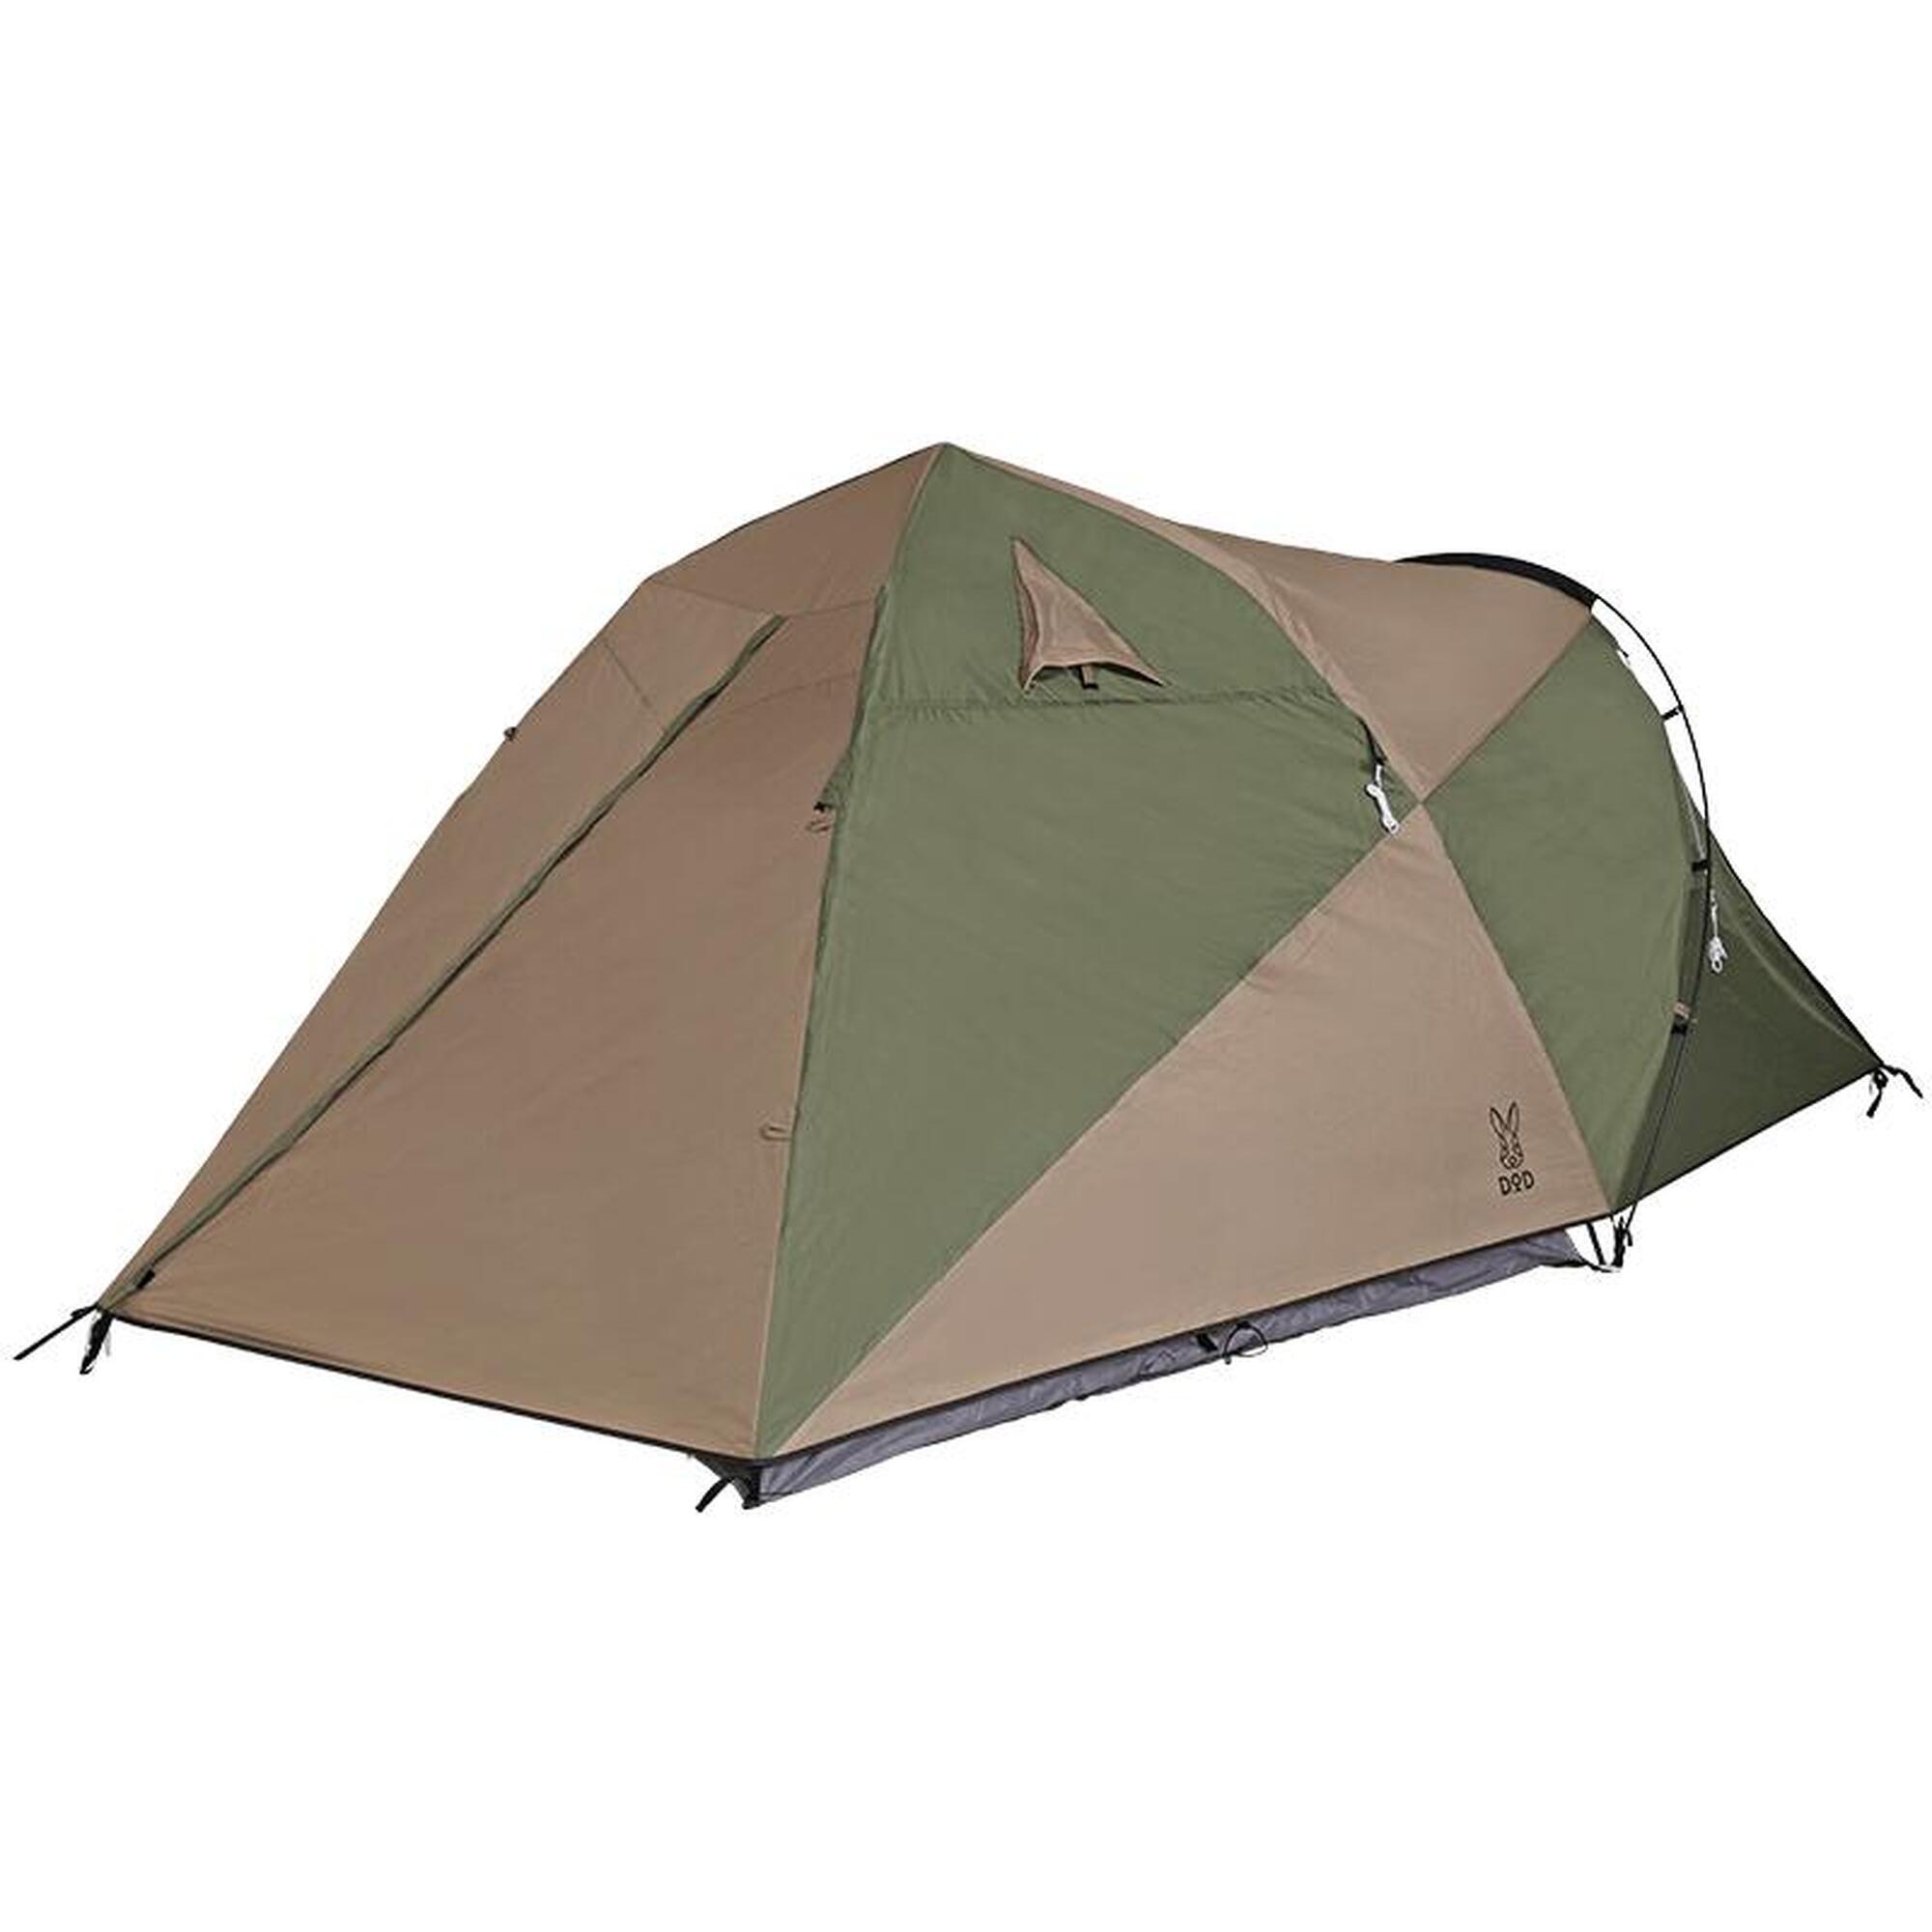 THE ONE TOUCH(M) T3-673-KH 3 Person Camping Tent - Khaki